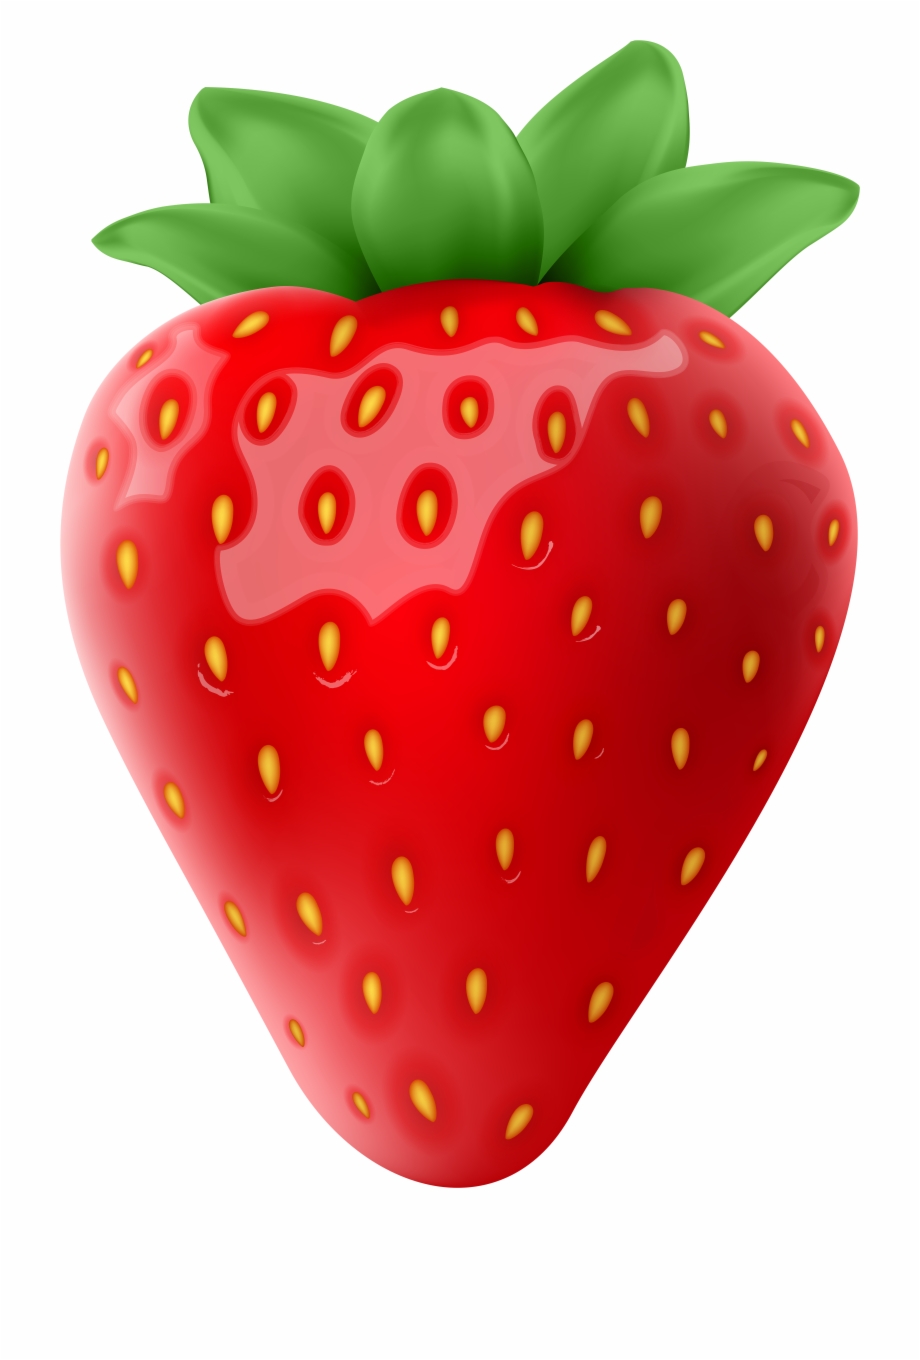 Transparent background strawberry png. Strawberries clipart cool